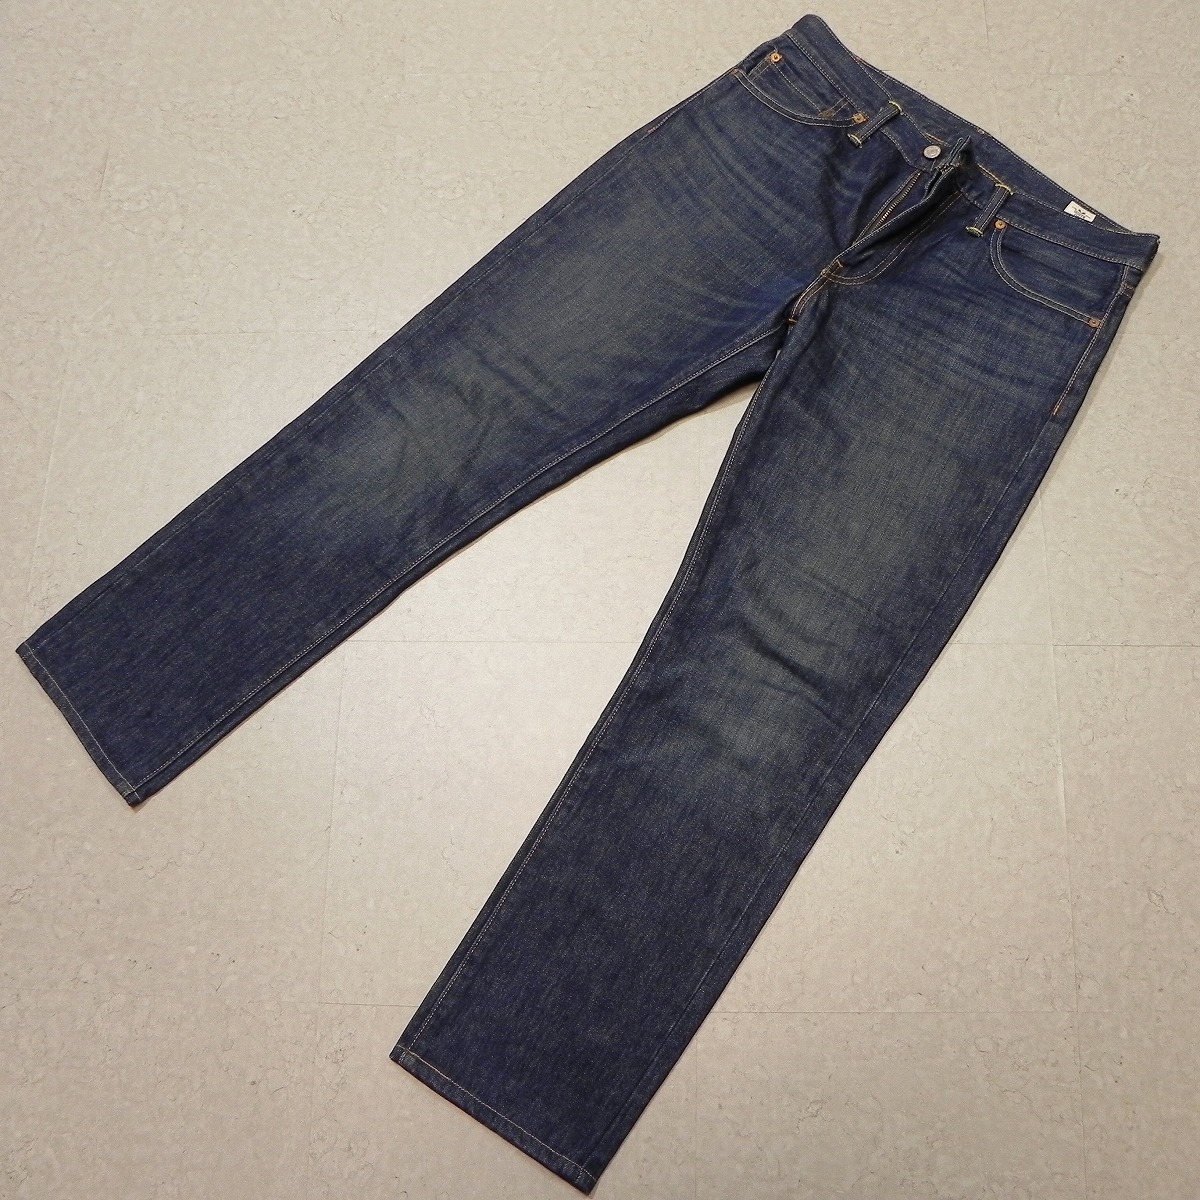 m643☆米国製 Levi's 511 スリム MADE IN THE USA WHITE OAK W33